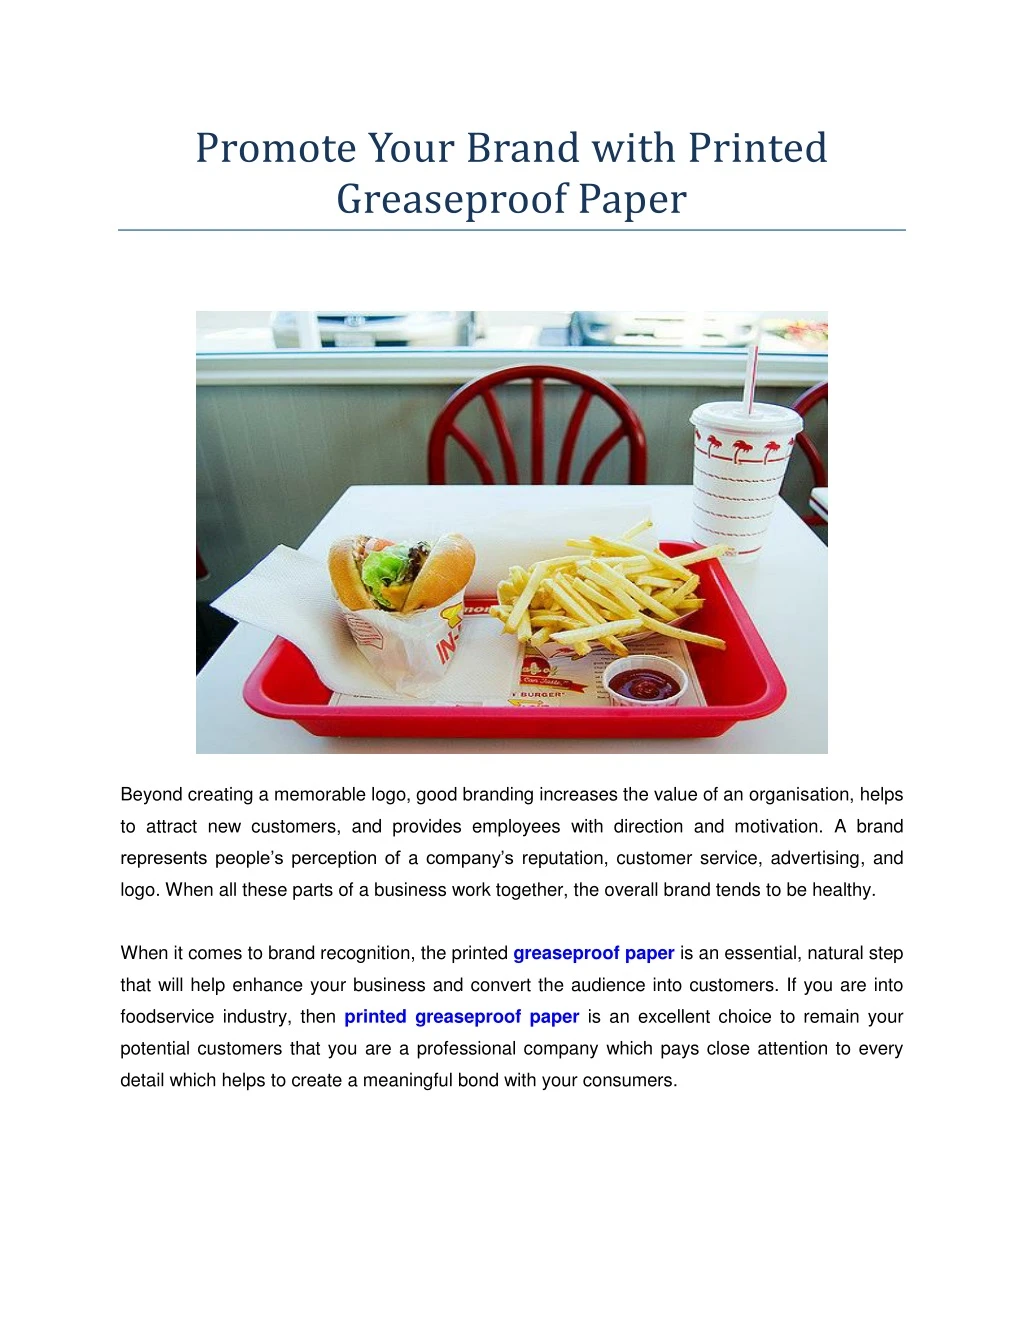 promote your brand with printed greaseproof paper